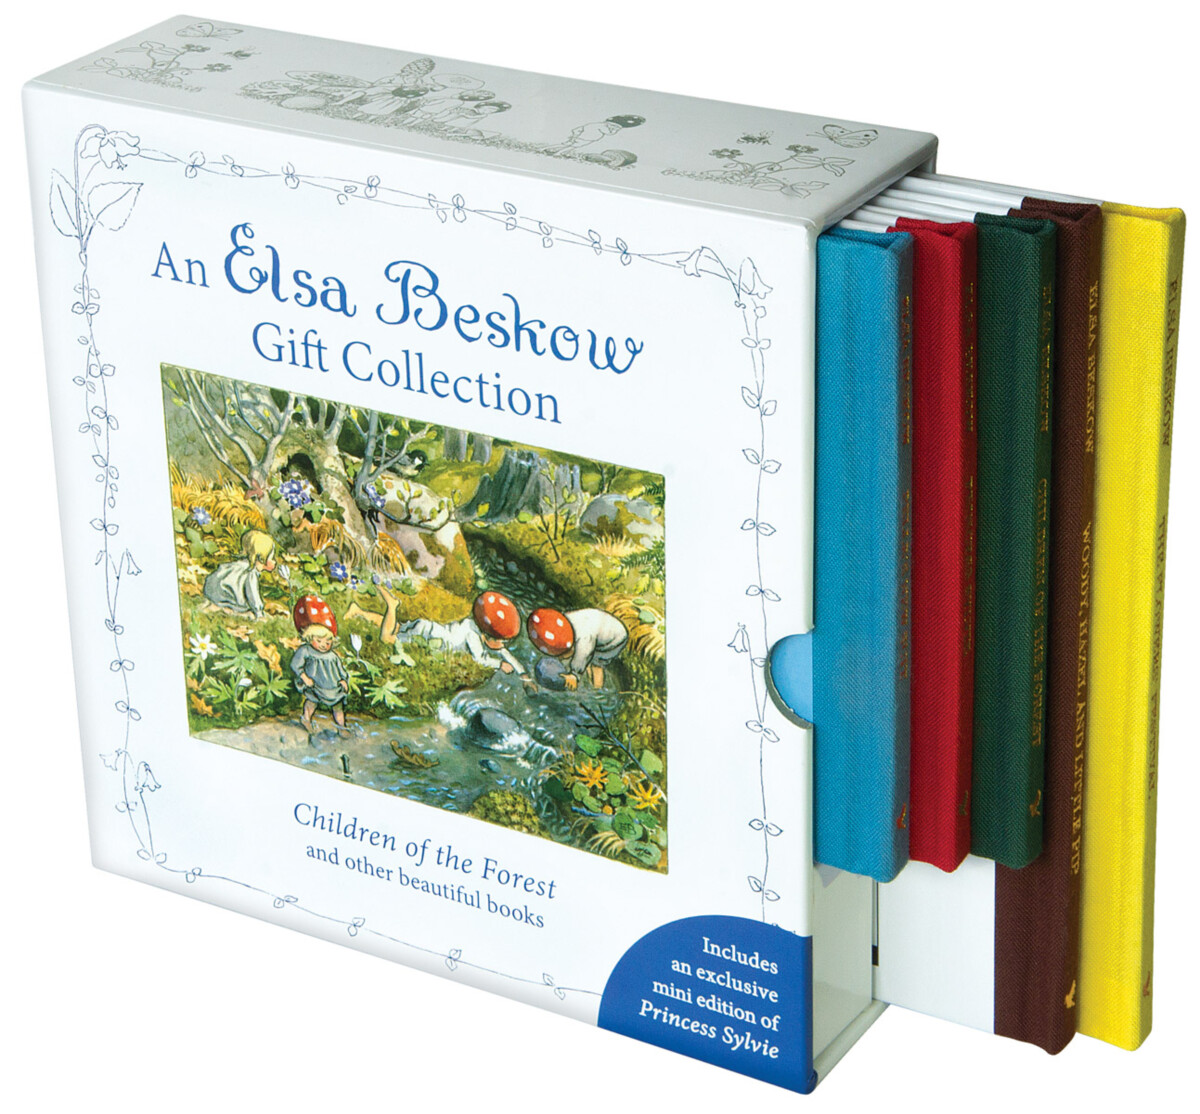 An Elsa Beskow Gift Collection